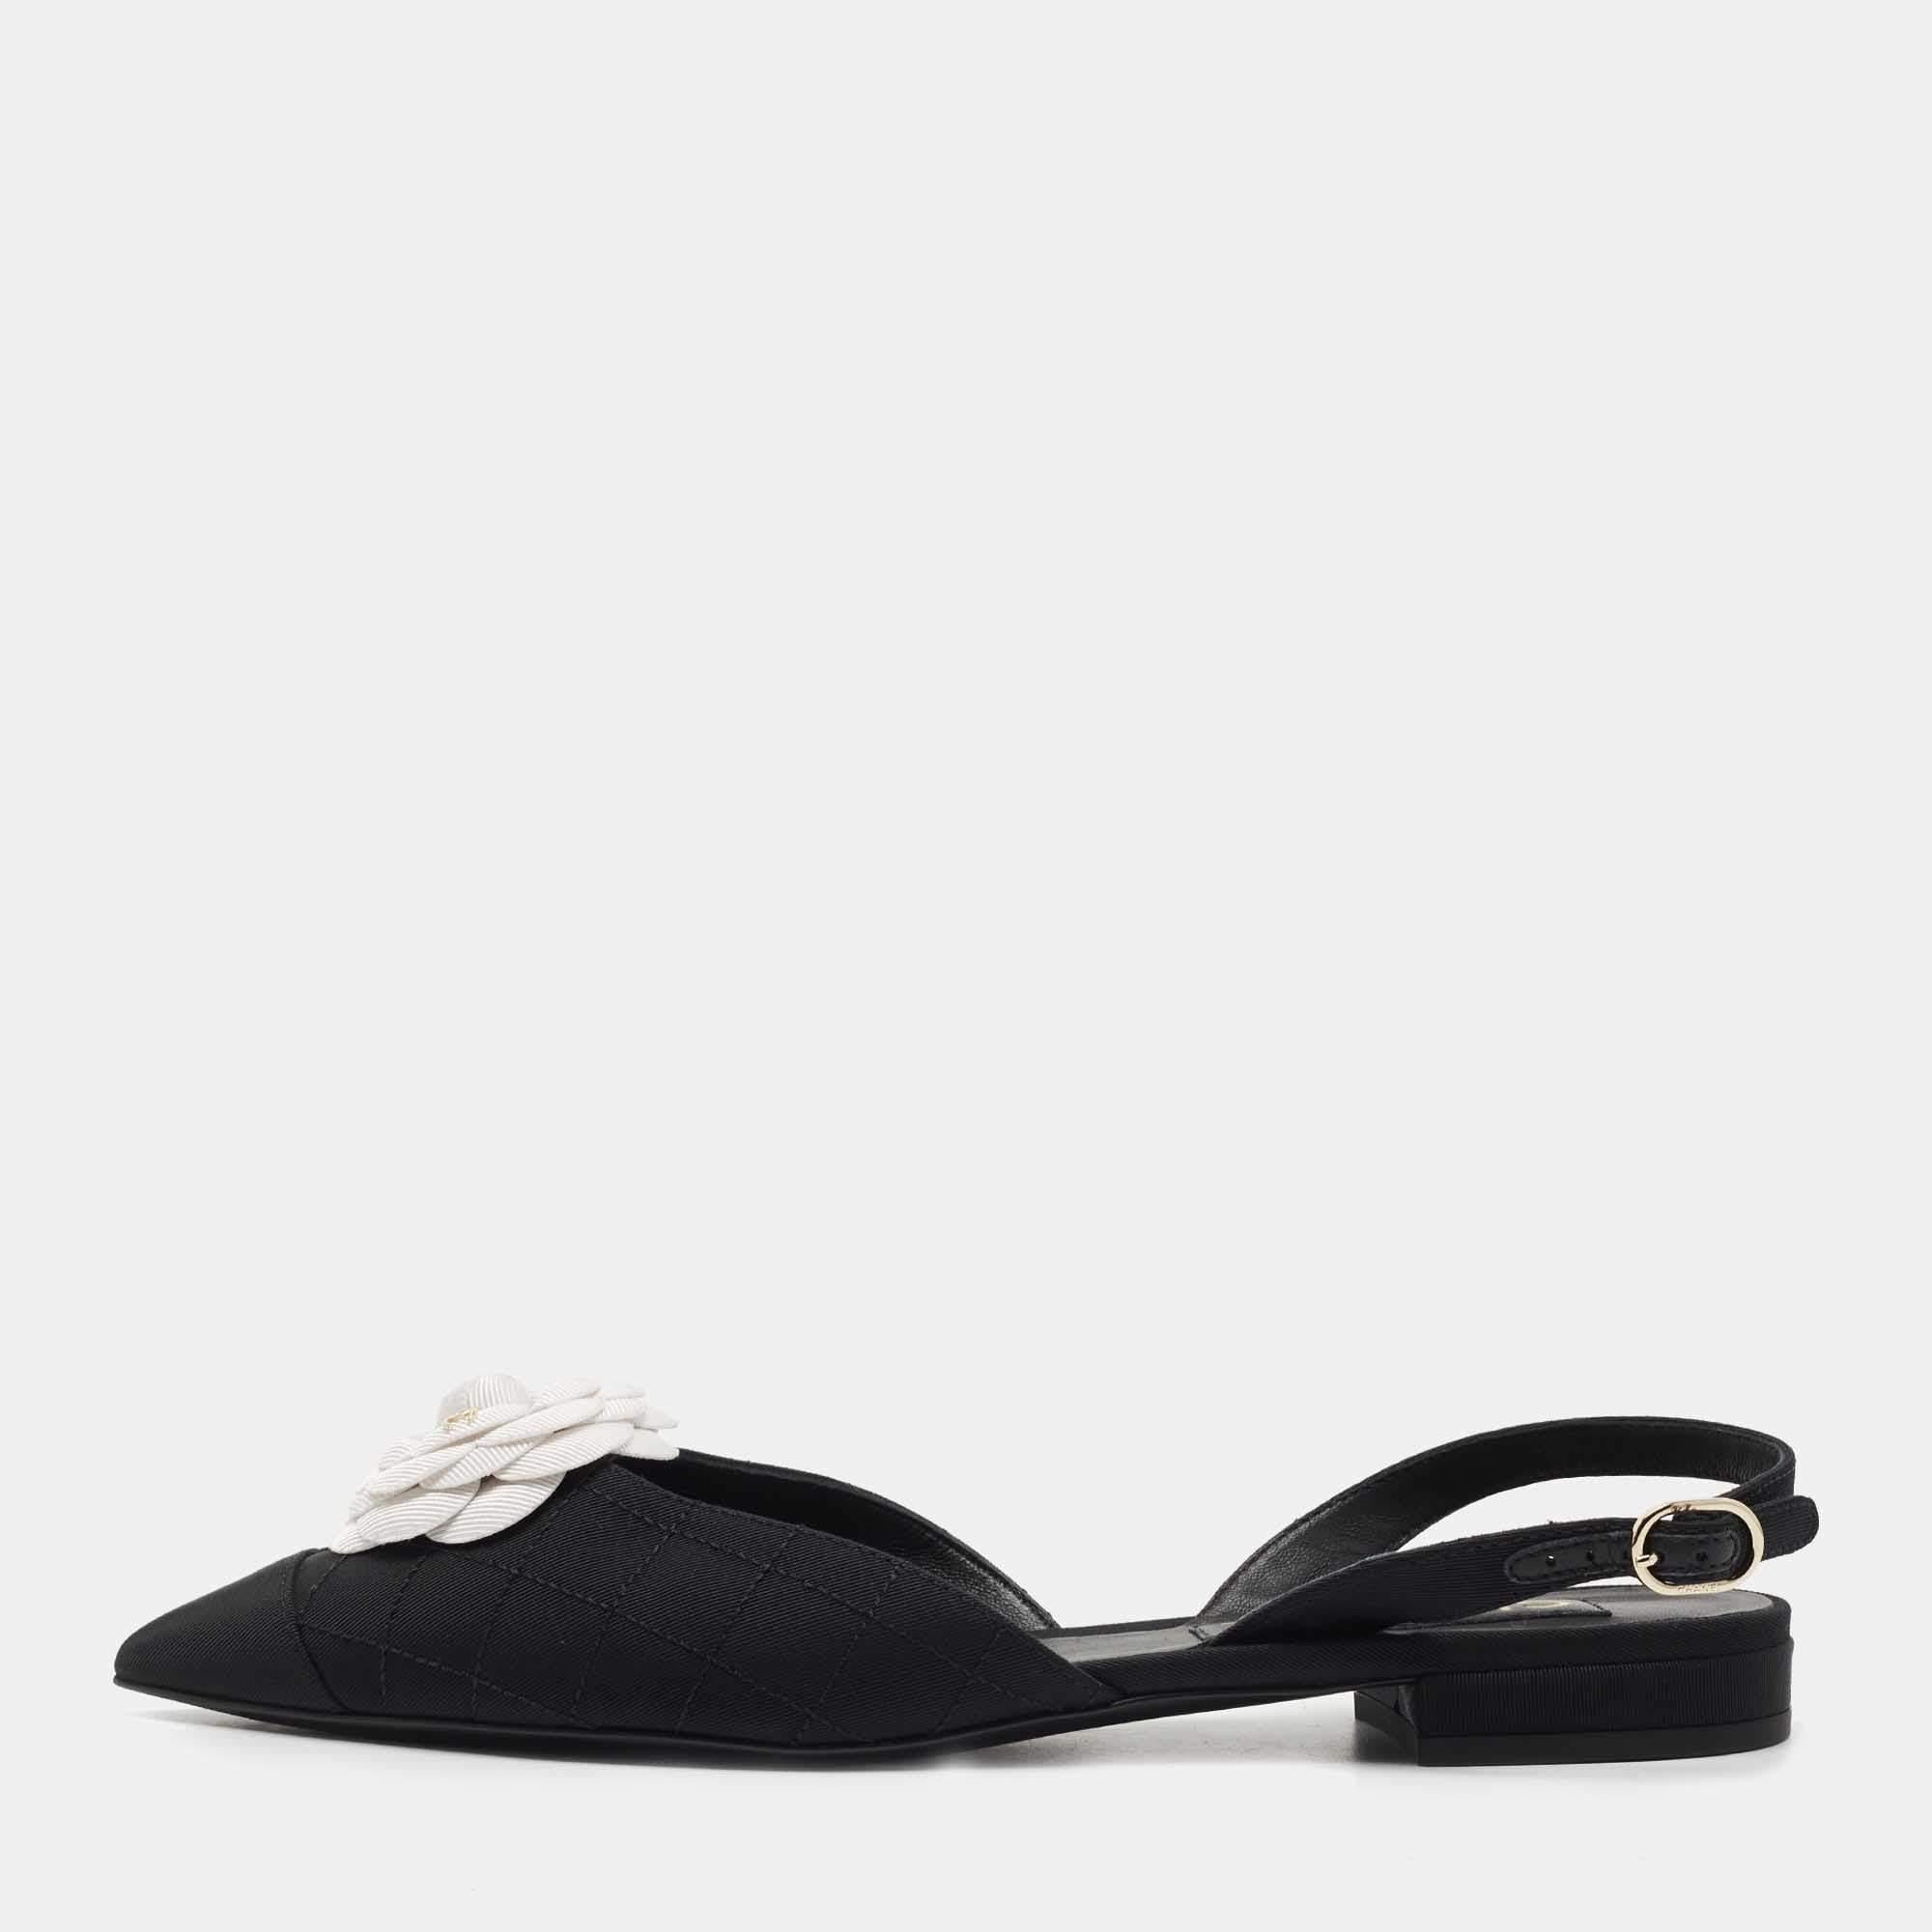 A perfect blend of luxury, style, and comfort. These designer flats are made using prime quality materials and frame your feet in the most elegant way. They can be paired with a host of outfits from your wardrobe.

Includes: Original Dust bag